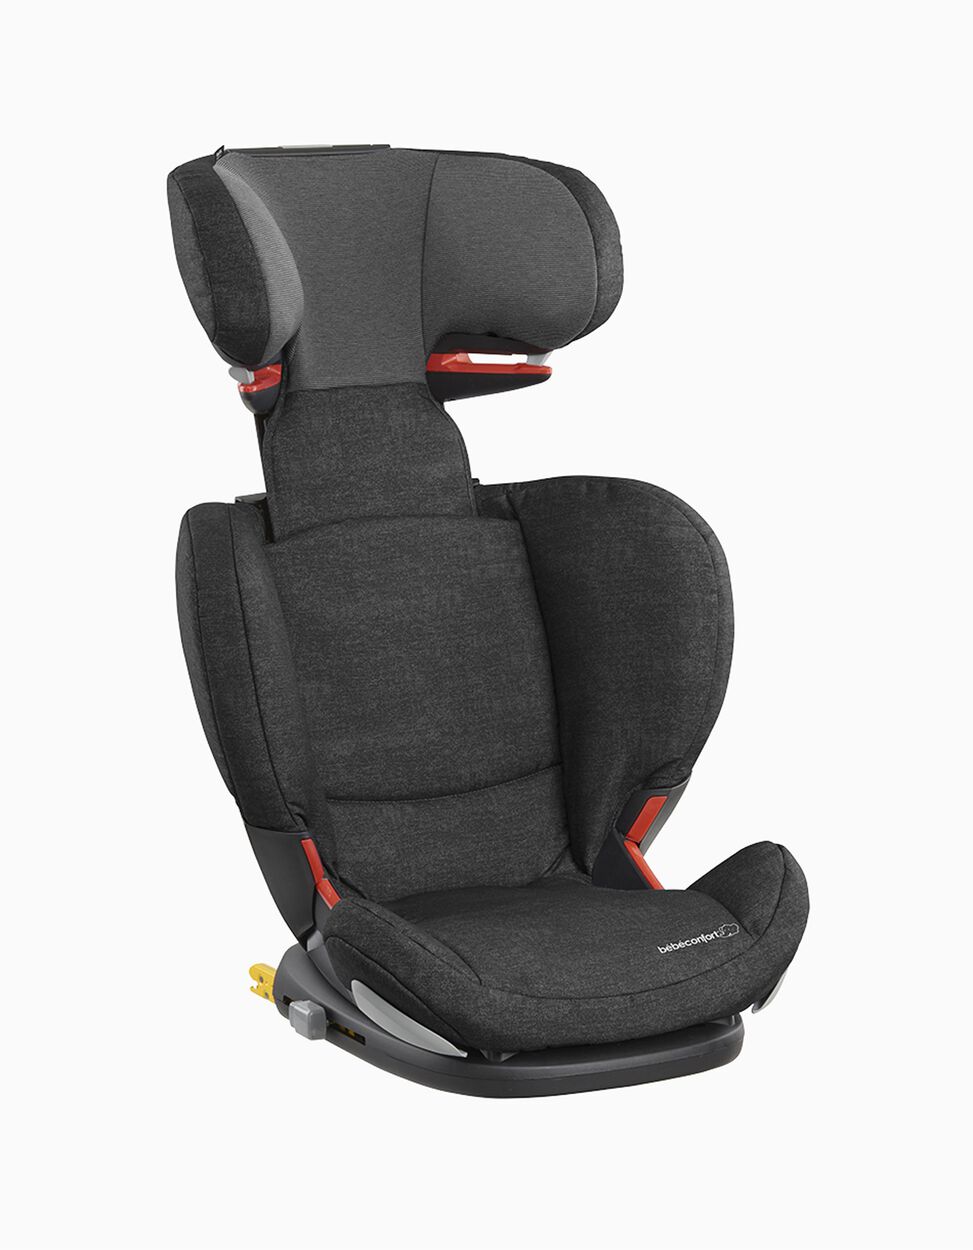 Car Seat Gr 2 3 Rodifix Airprotect Bebe Confort Nomad Black Zippy Online